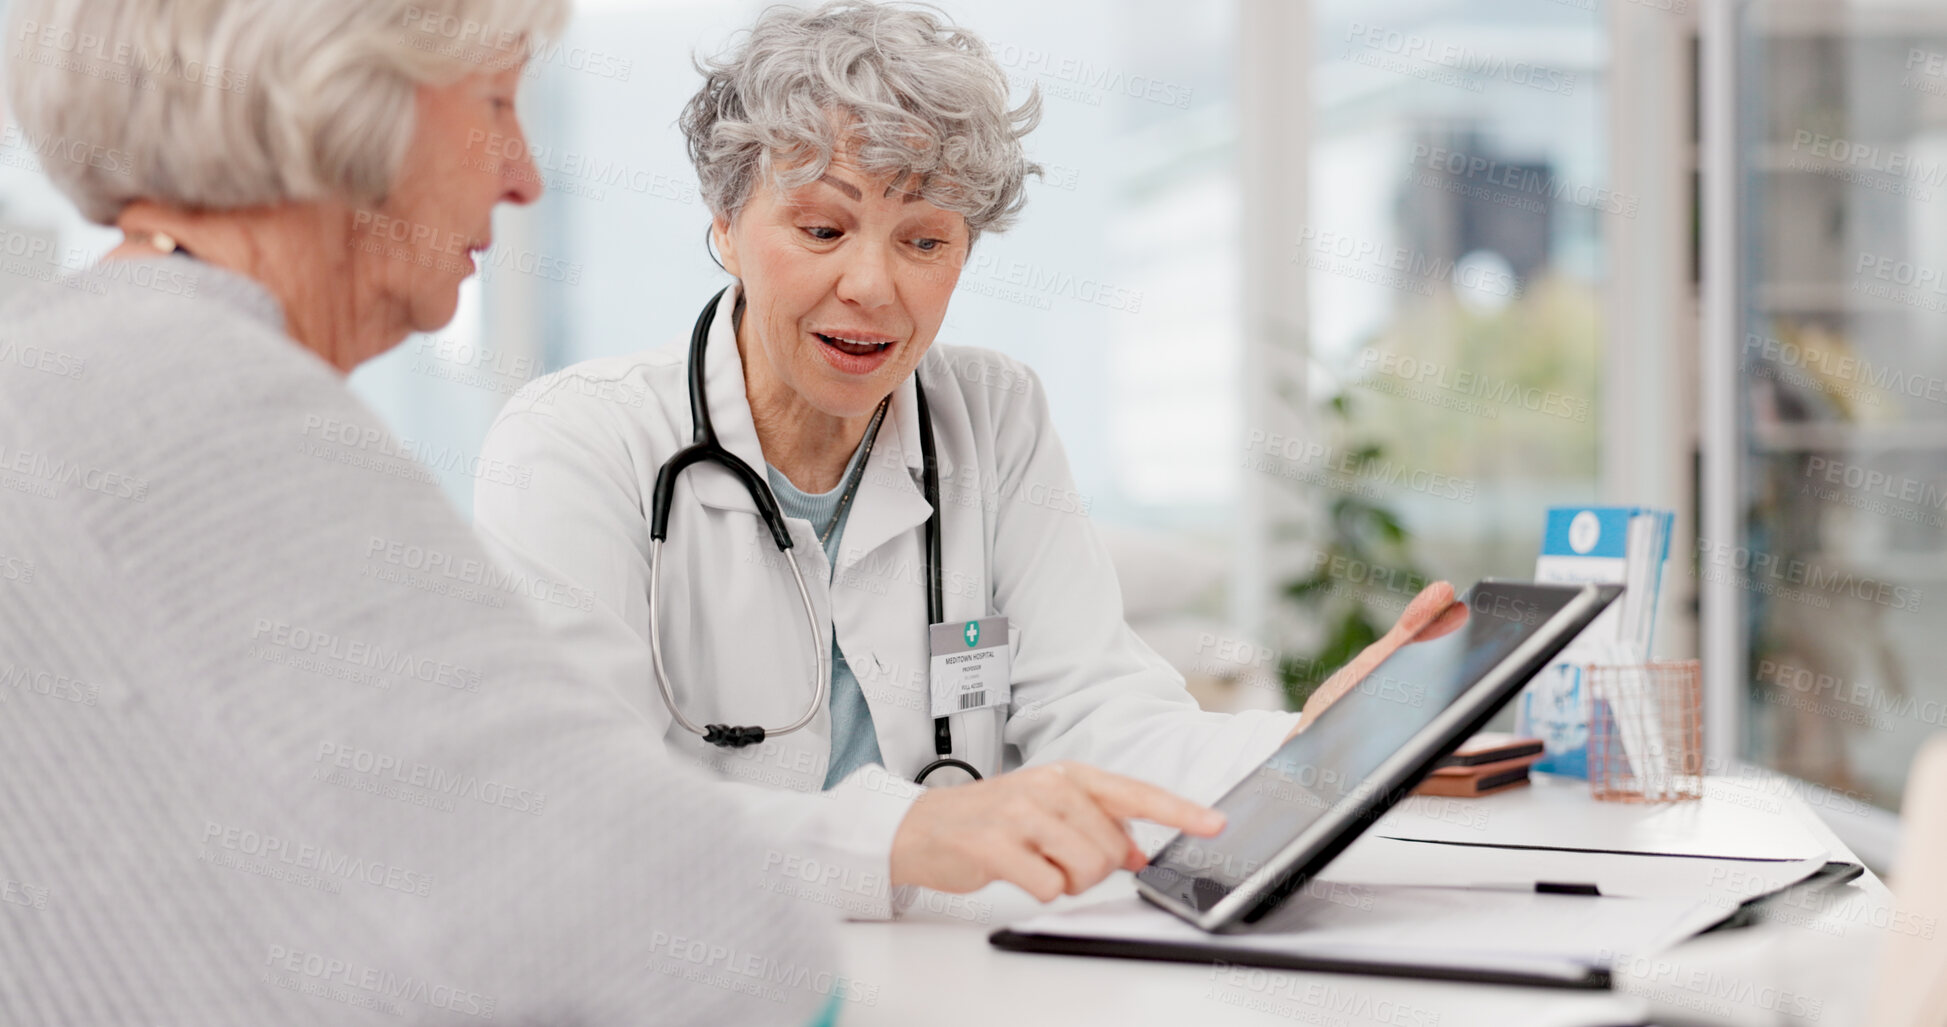 Buy stock photo Senior doctor, tablet and discussion with patient for healthcare prescription or diagnosis at hospital. Mature medical professional talking to elderly female person on technology for consultation